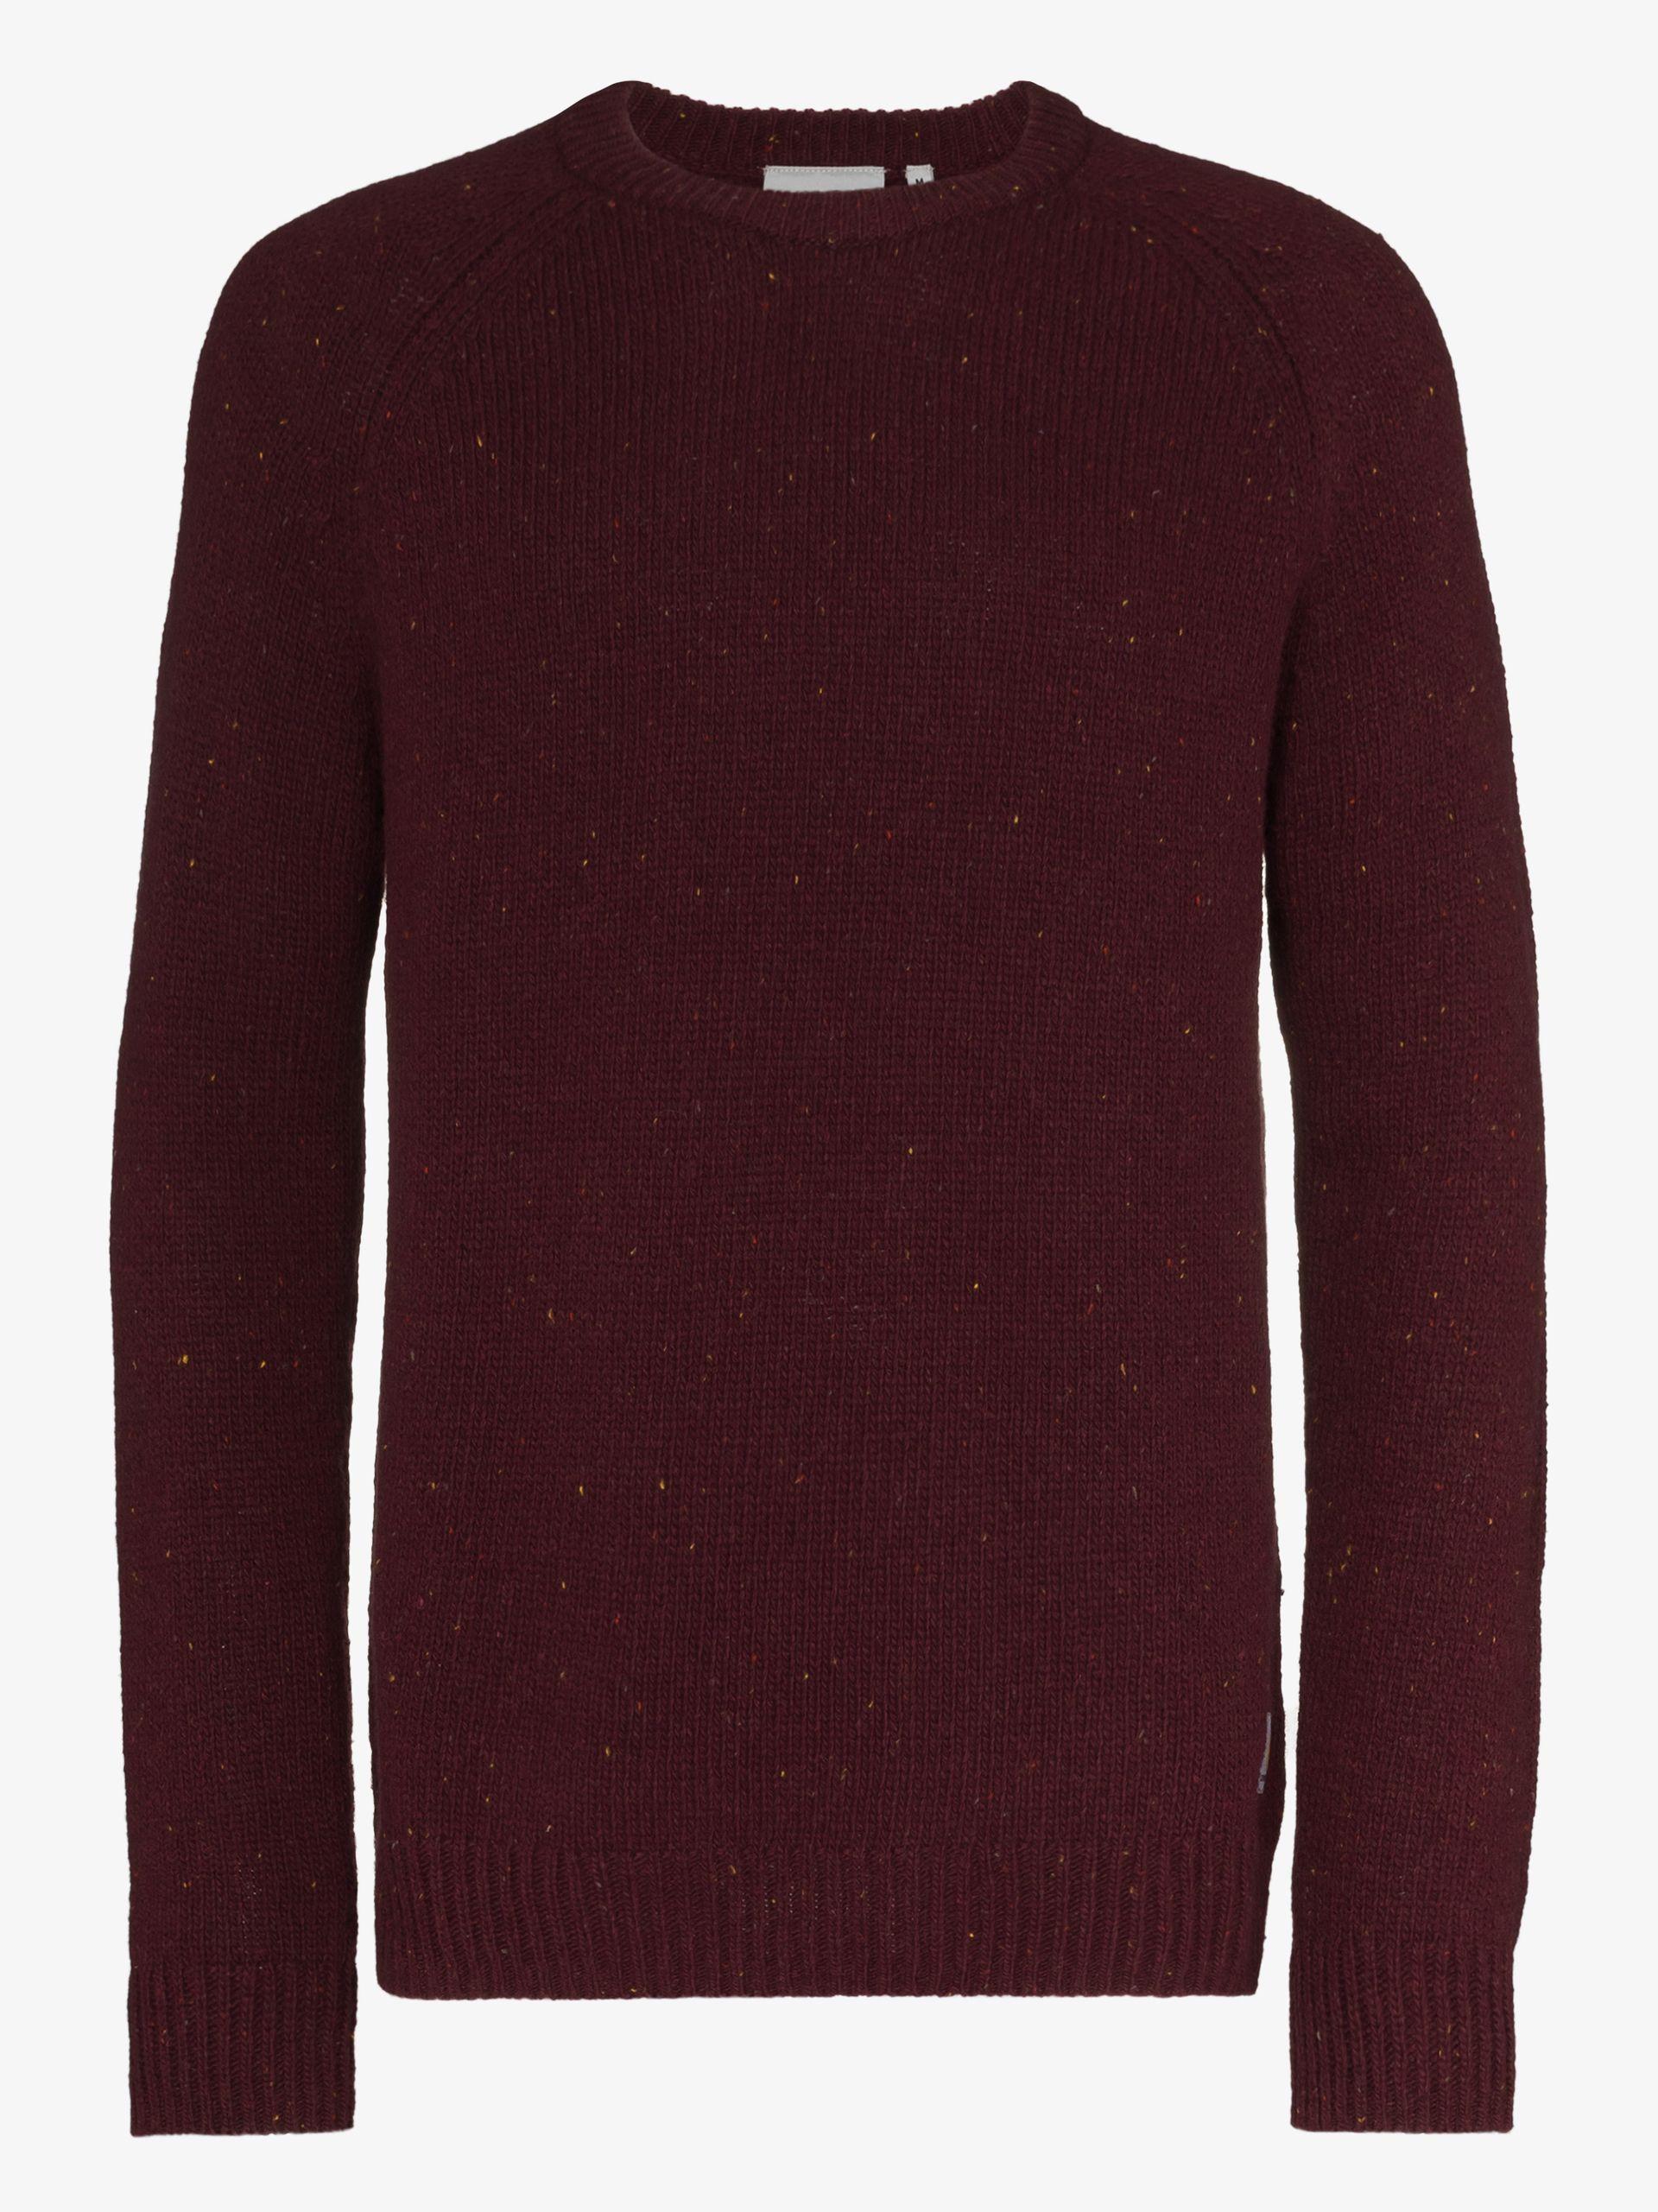 Carhartt WIP Wool Anglistic Speckled Sweater in Red for Men | Lyst